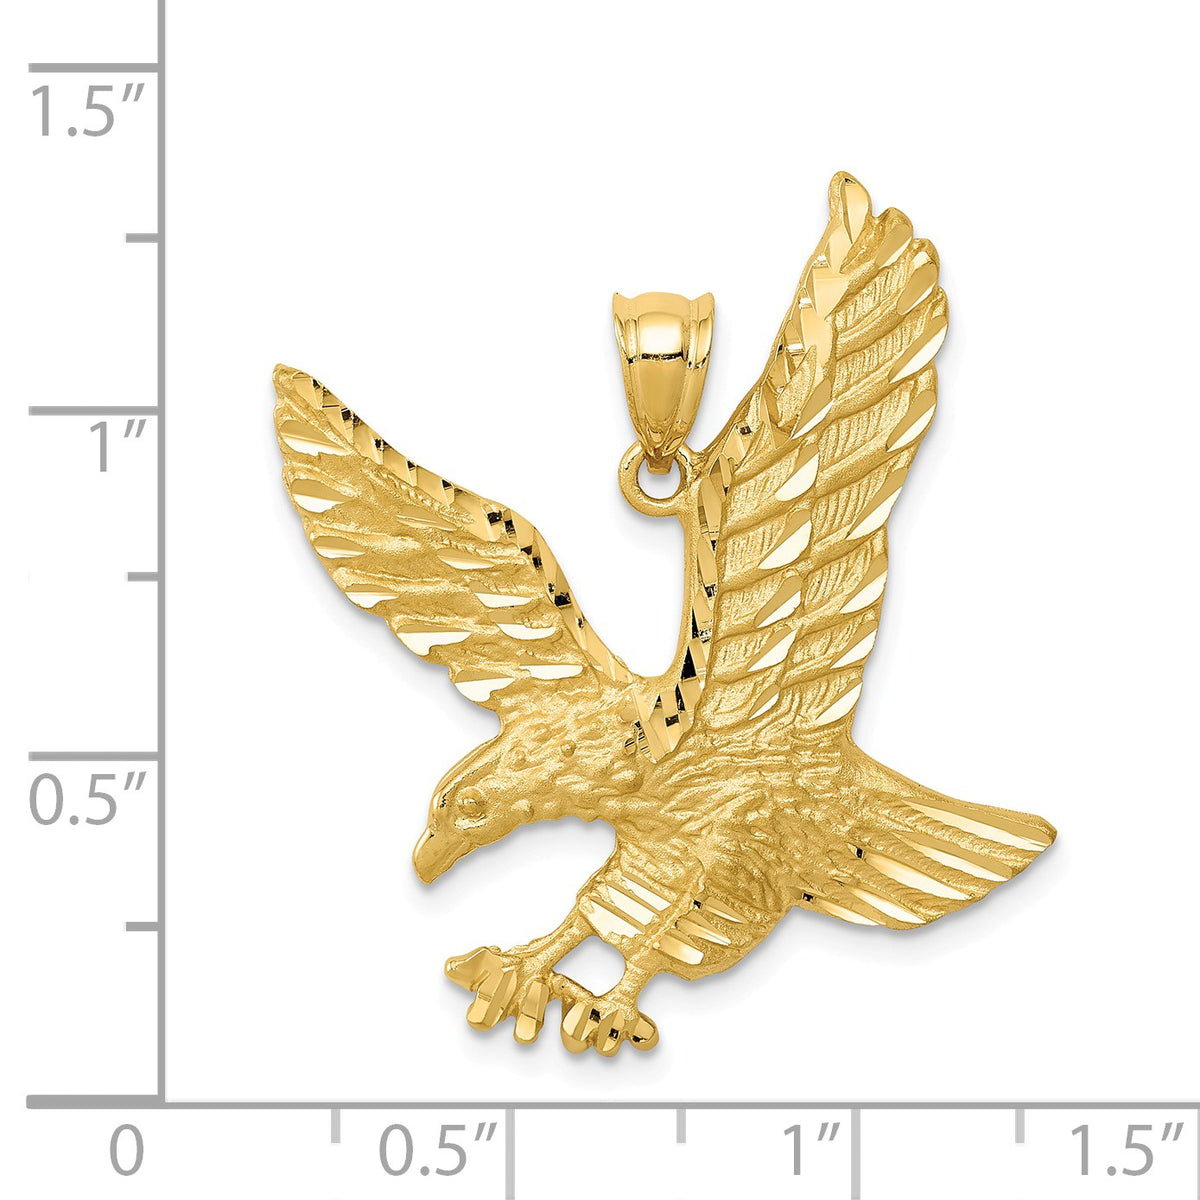 Alternate view of the 14k Yellow Gold Satin and Diamond Cut Eagle Pendant, 25mm by The Black Bow Jewelry Co.